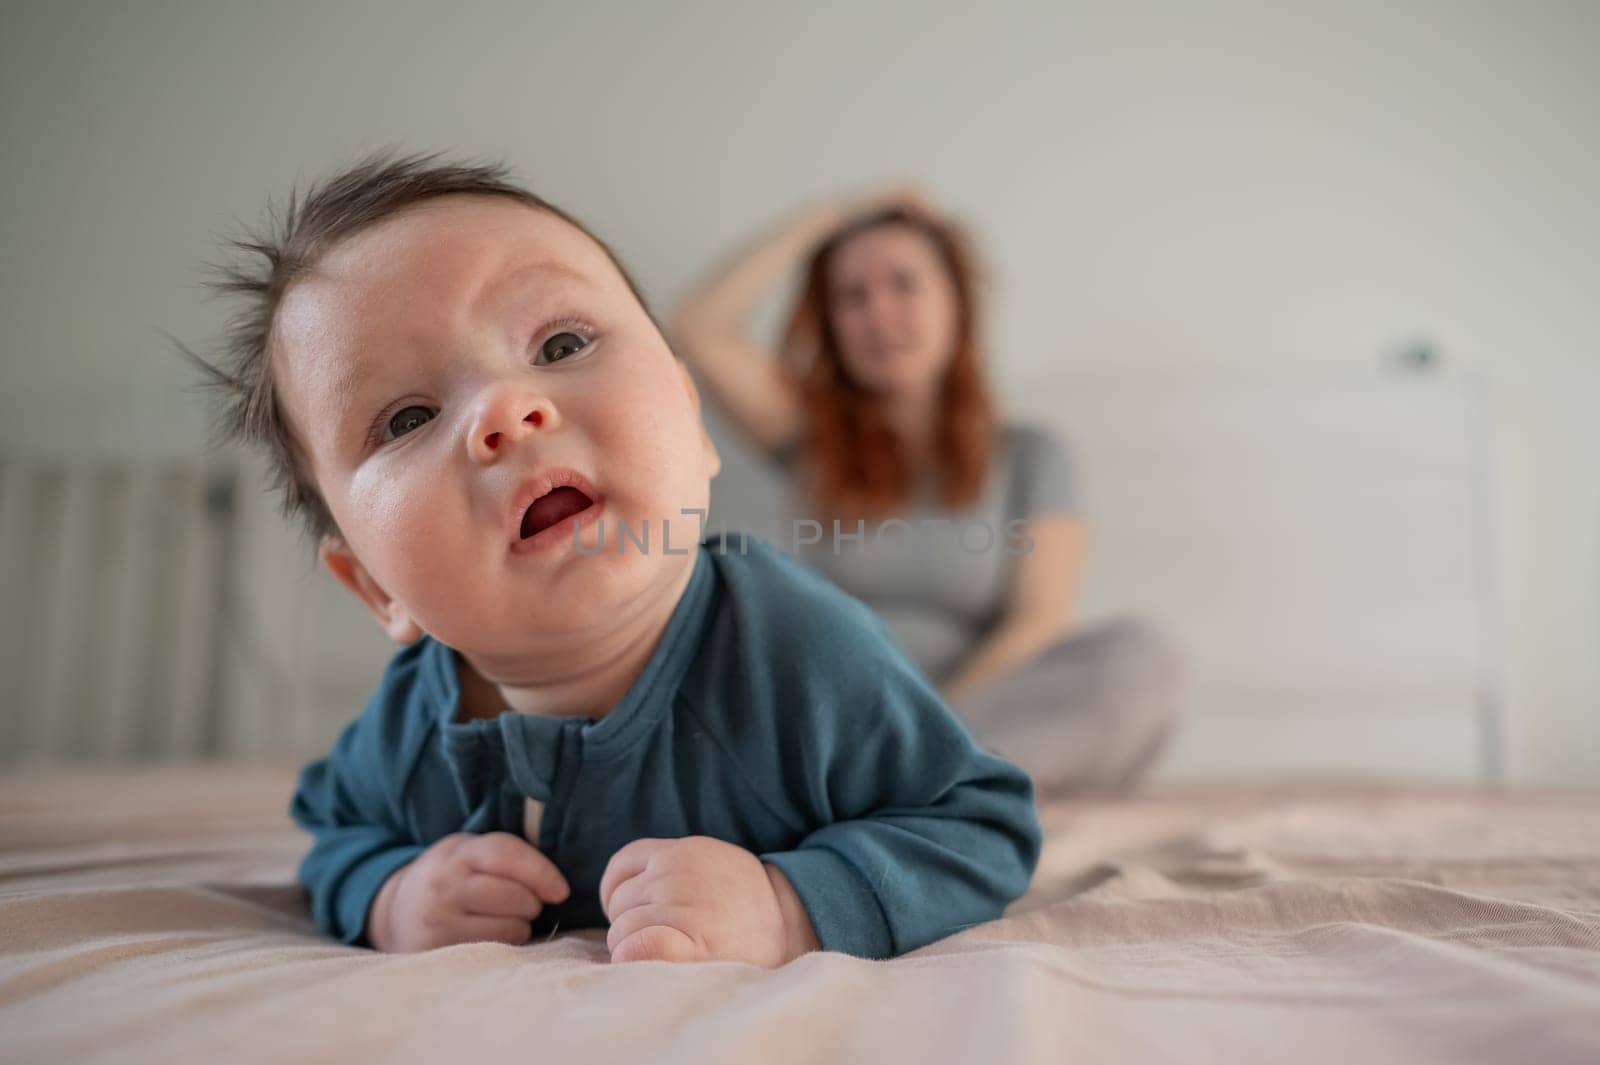 A three-month-old boy lies on his stomach on the bed and his mother sits behind him and cries. Postpartum depression